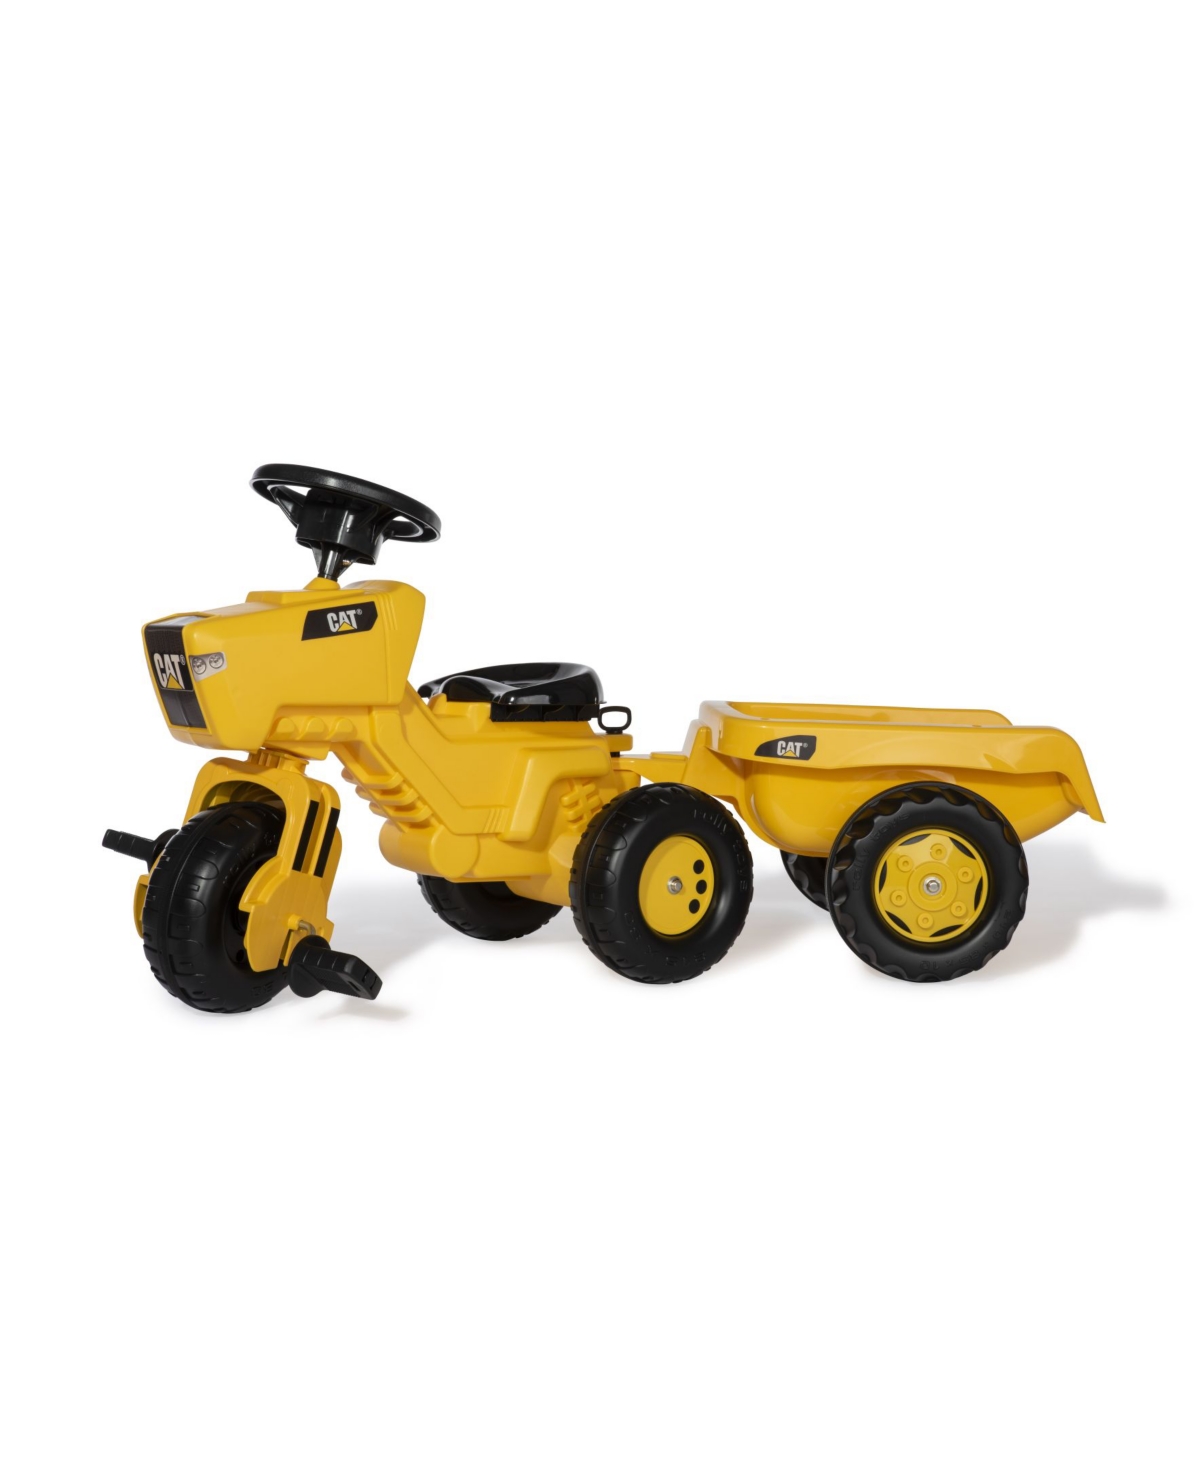 Rolly Toys Cat 3 Wheel Trike Pedal Tractor With Removable Hauling Trailer In Yellow